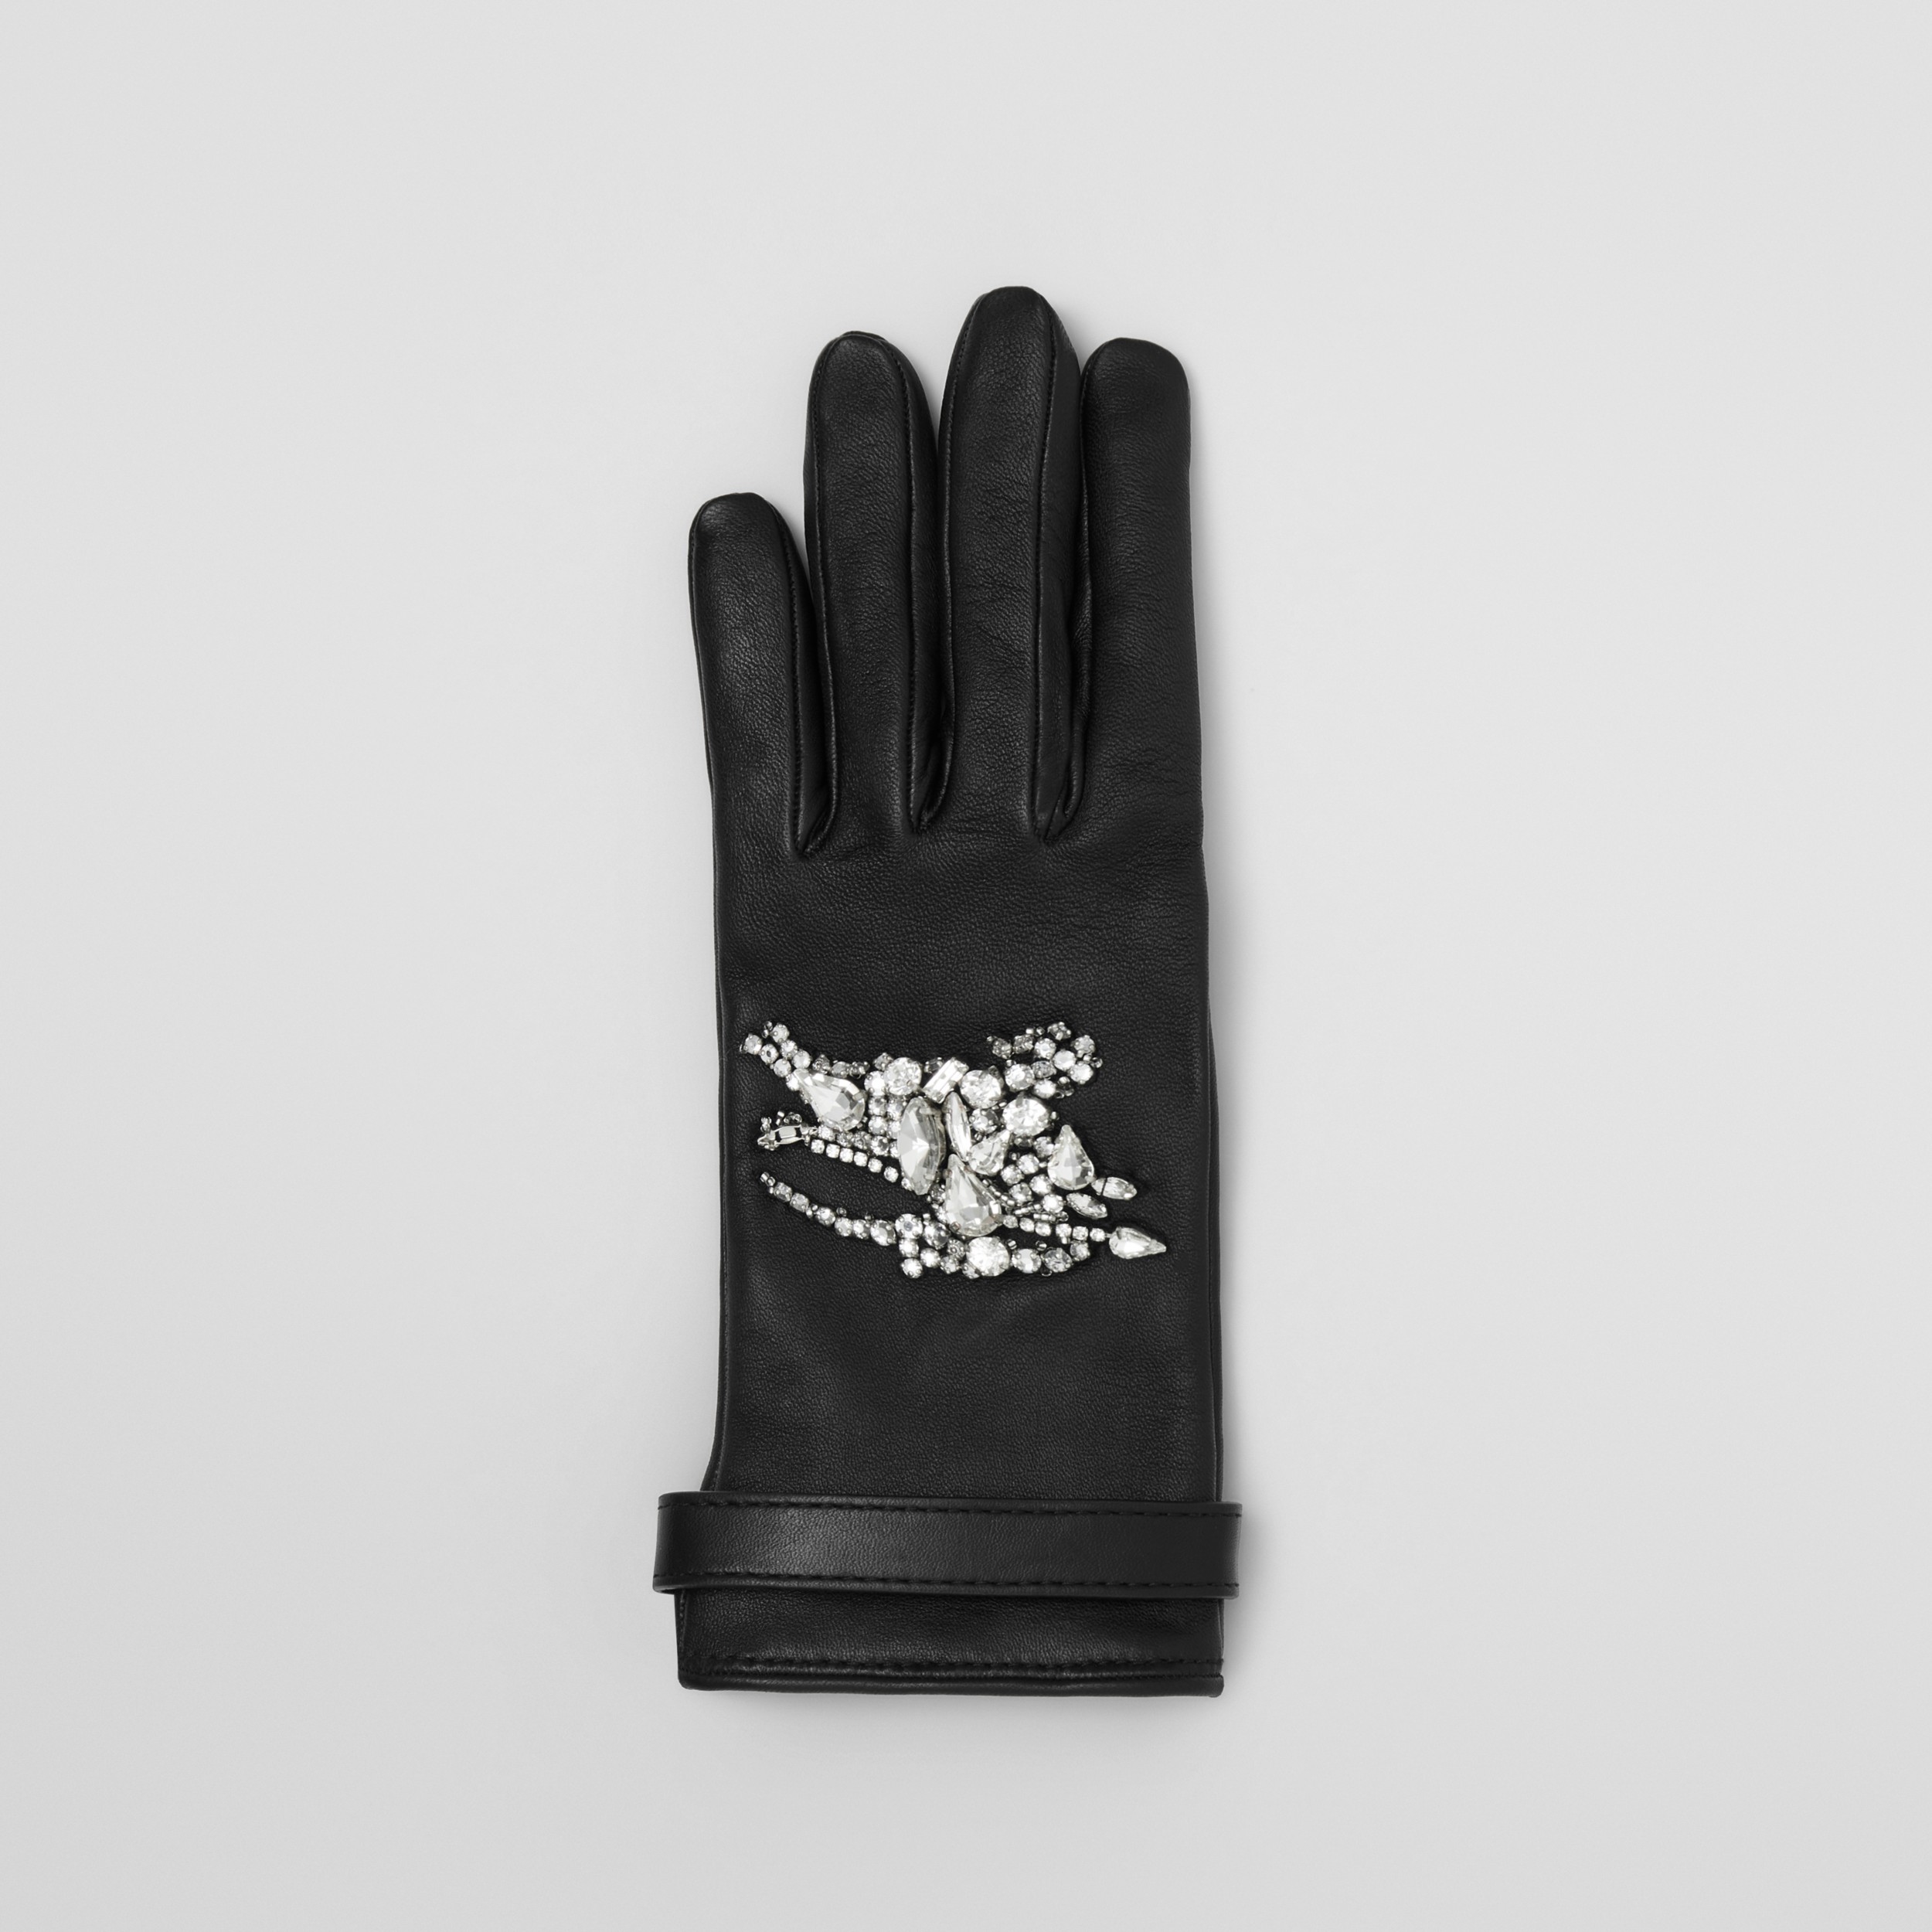 Crystal Equestrian Knight Design leather Gloves in Black - Women ...